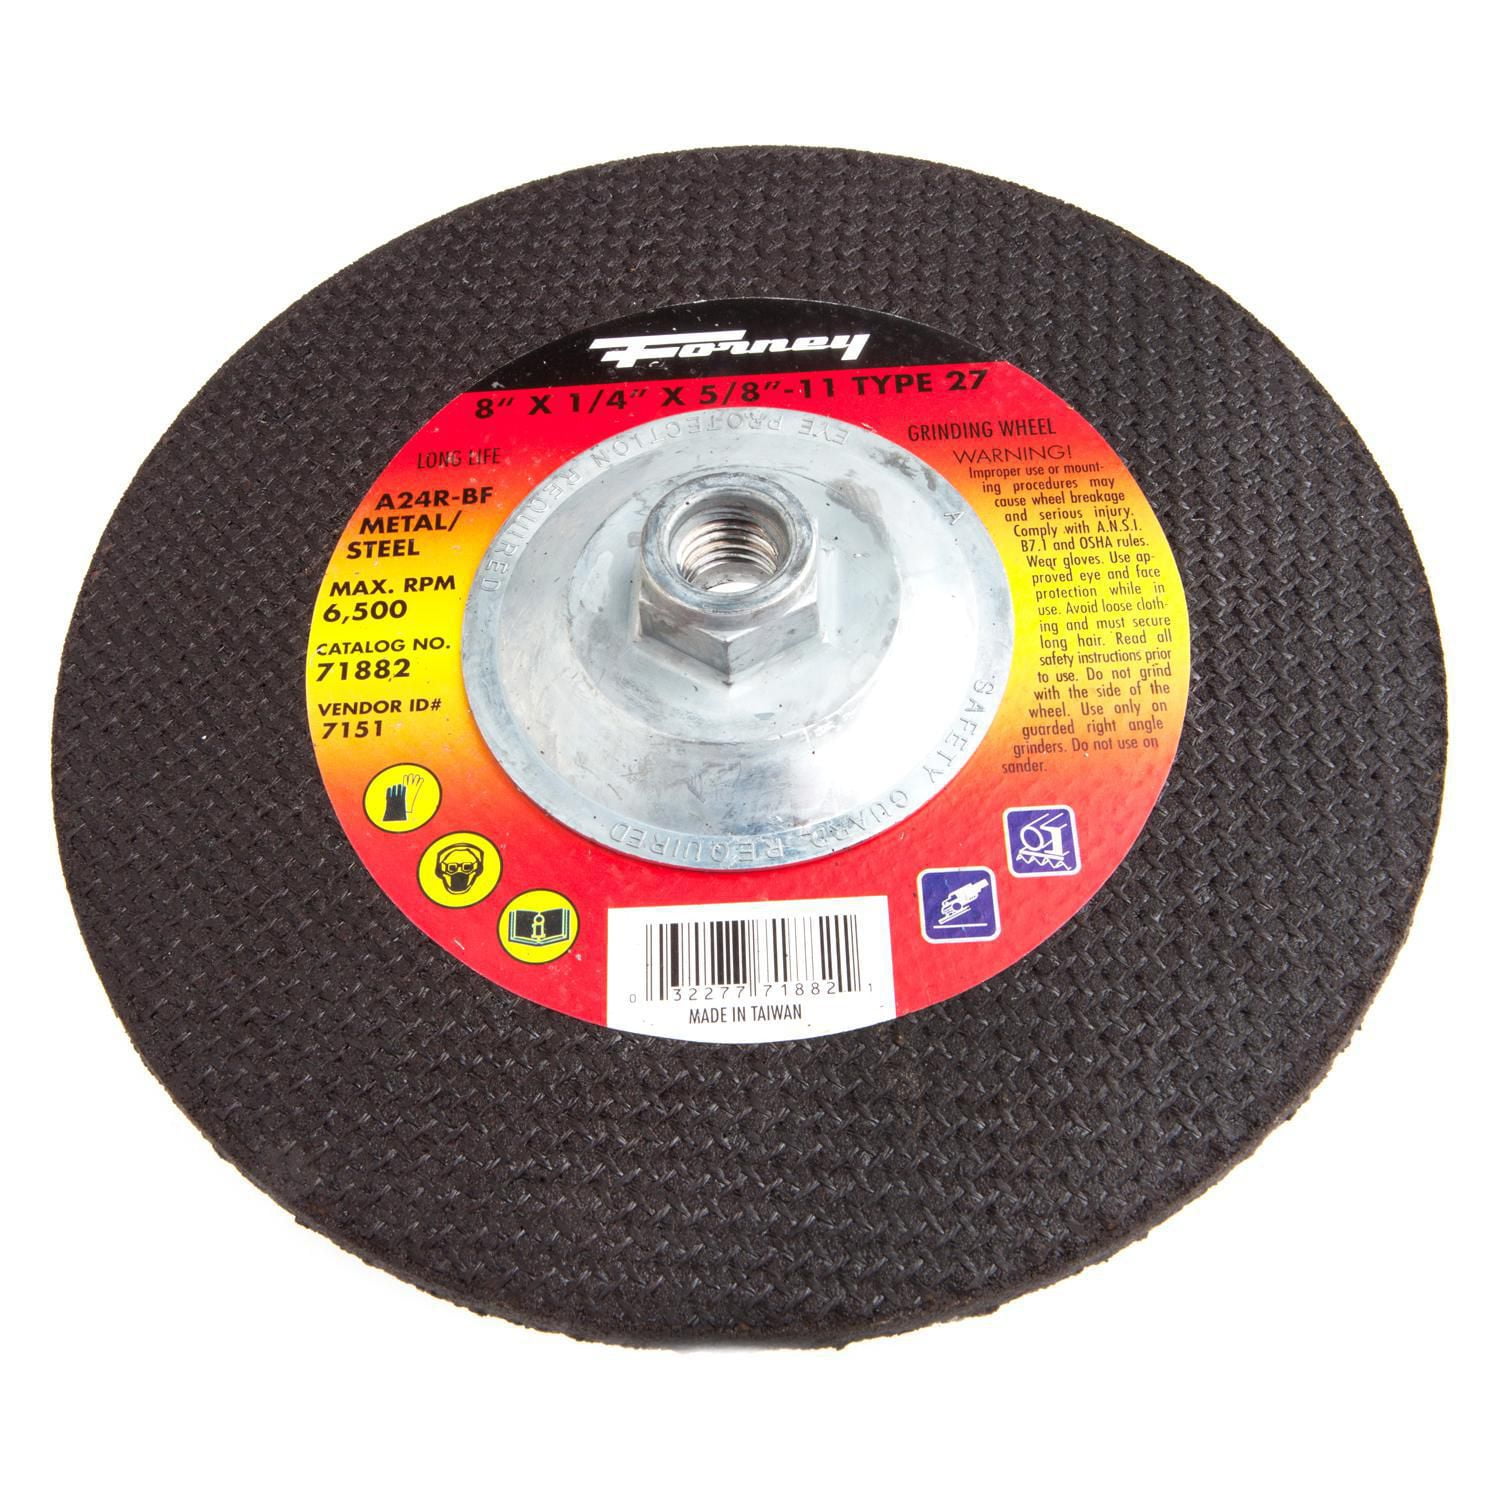 2407567 8 In. Dia. X 0.25 In. Thick Aluminum Oxide Metal Grinding Wheel, 6500 Rpm